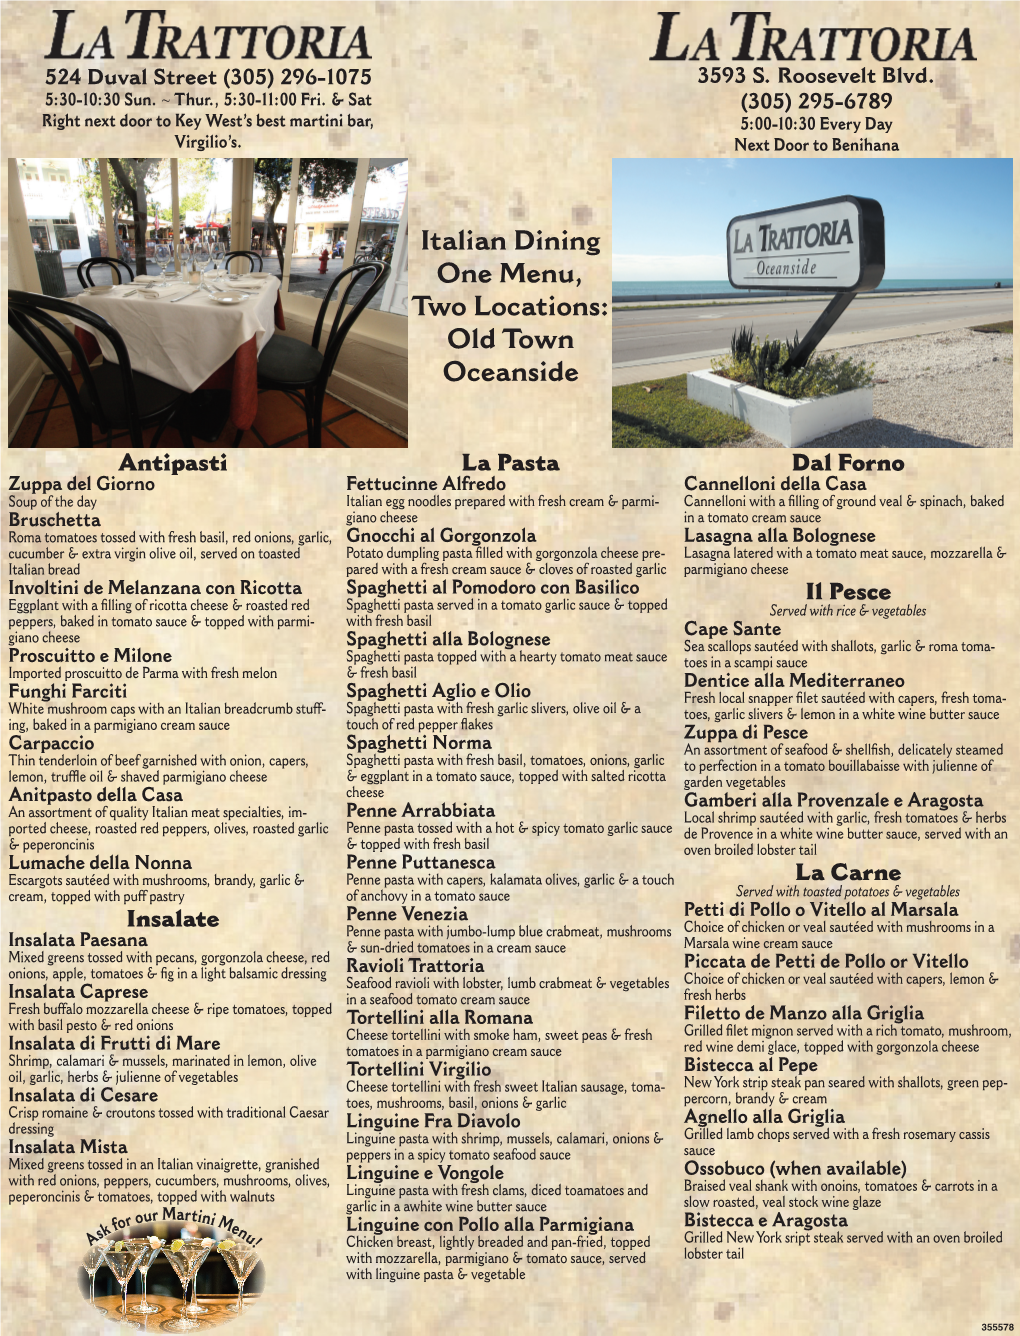 Italian Dining One Menu, Two Locations: Old Town Oceanside